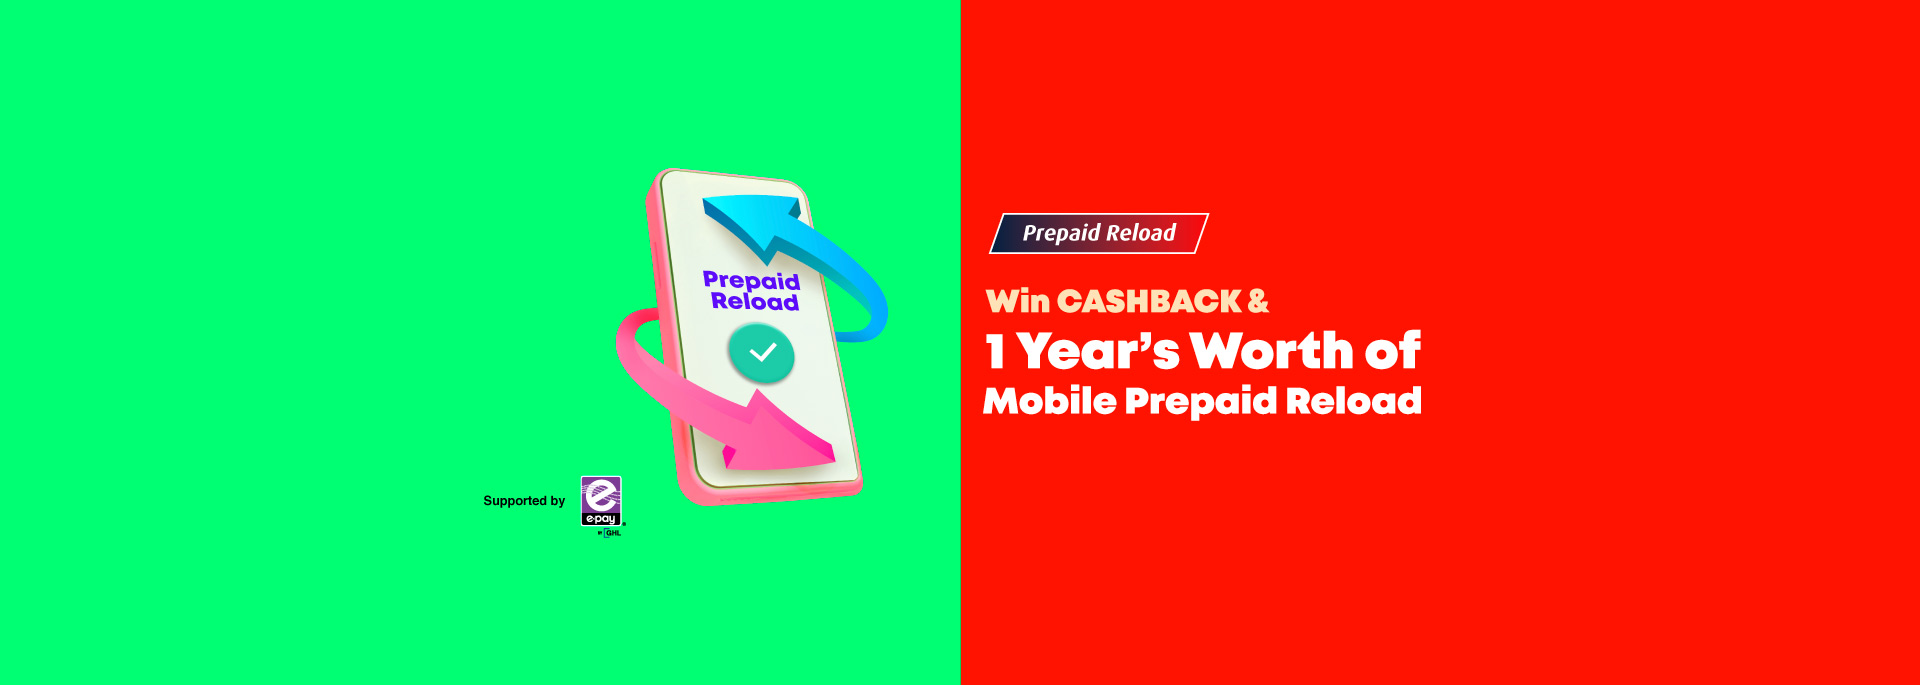 Win instant cashback & 1 year worth of Prepaid Reload